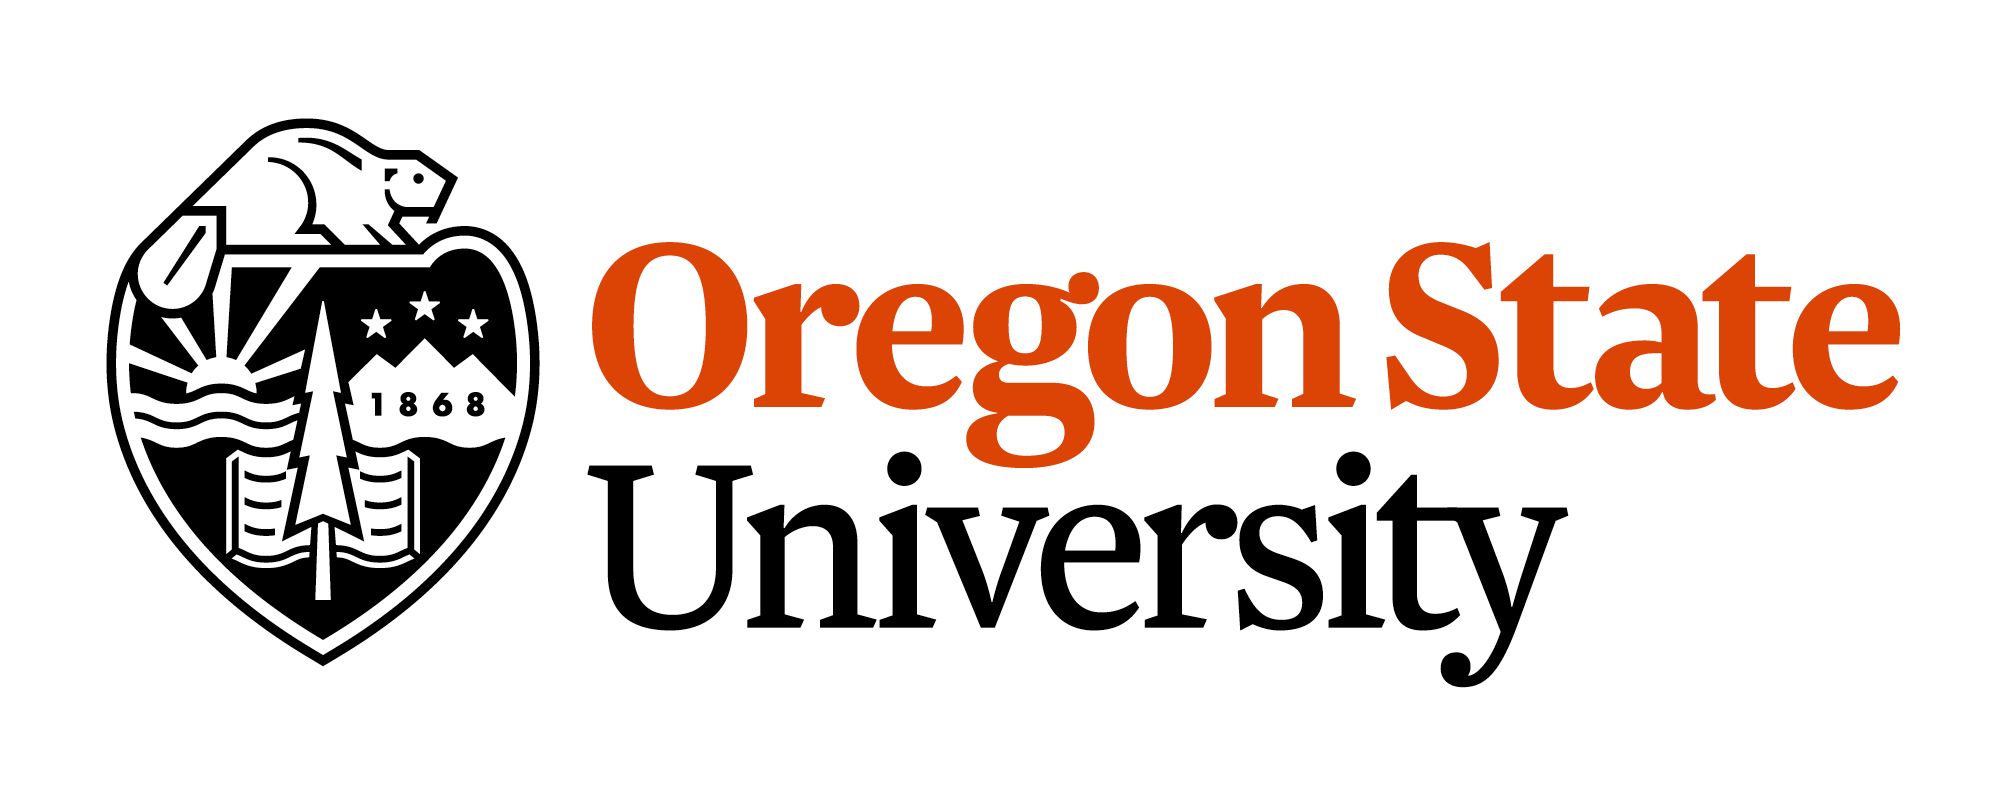 You are currently viewing Oregon State University: Oregon State University announces second campaign with $1 billion already given toward $1.75 billion goal